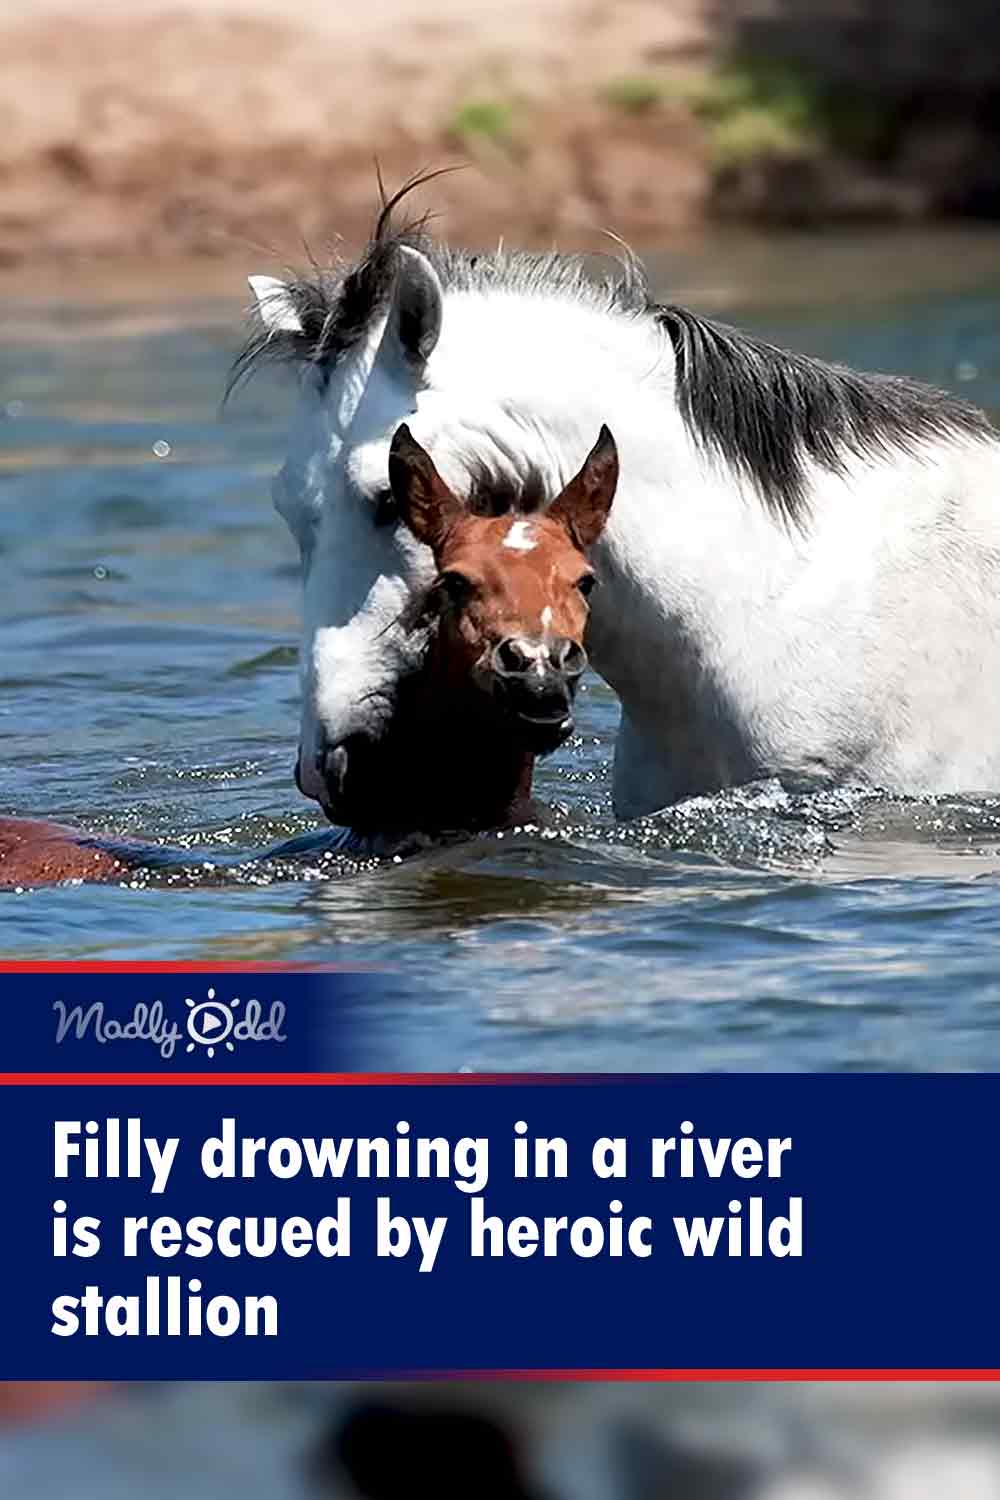 Filly drowning in a river is rescued by heroic wild stallion